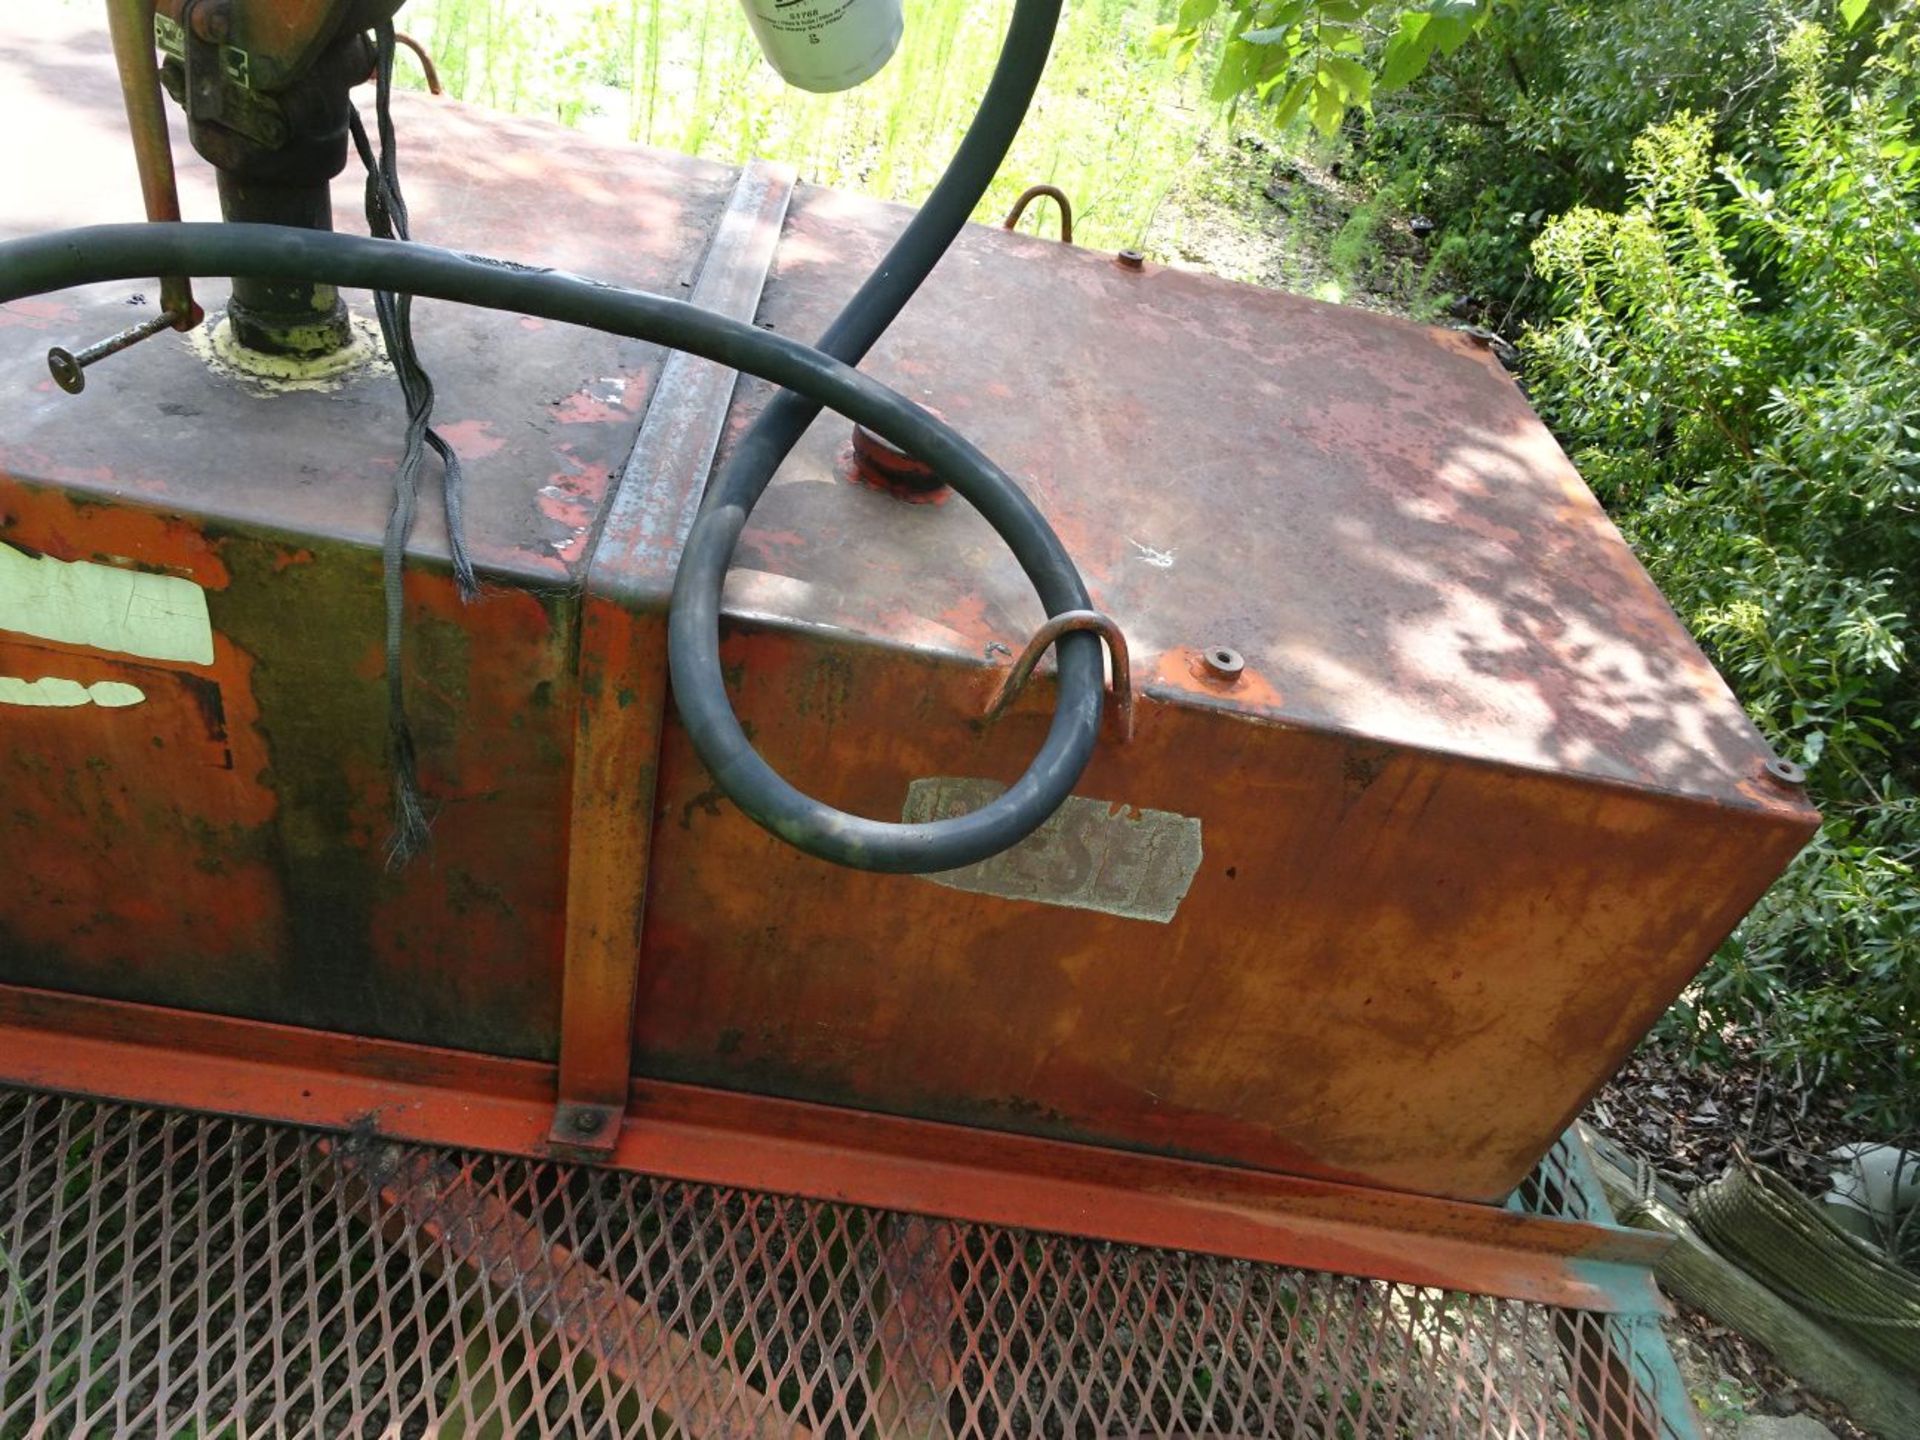 TOWABLE FUEL TRAILER, APPROX 150 GALLON, PIN STYLE HITCH, SINGLE AXLE, WITH MANUAL PUMP (LOCATION: - Image 4 of 4